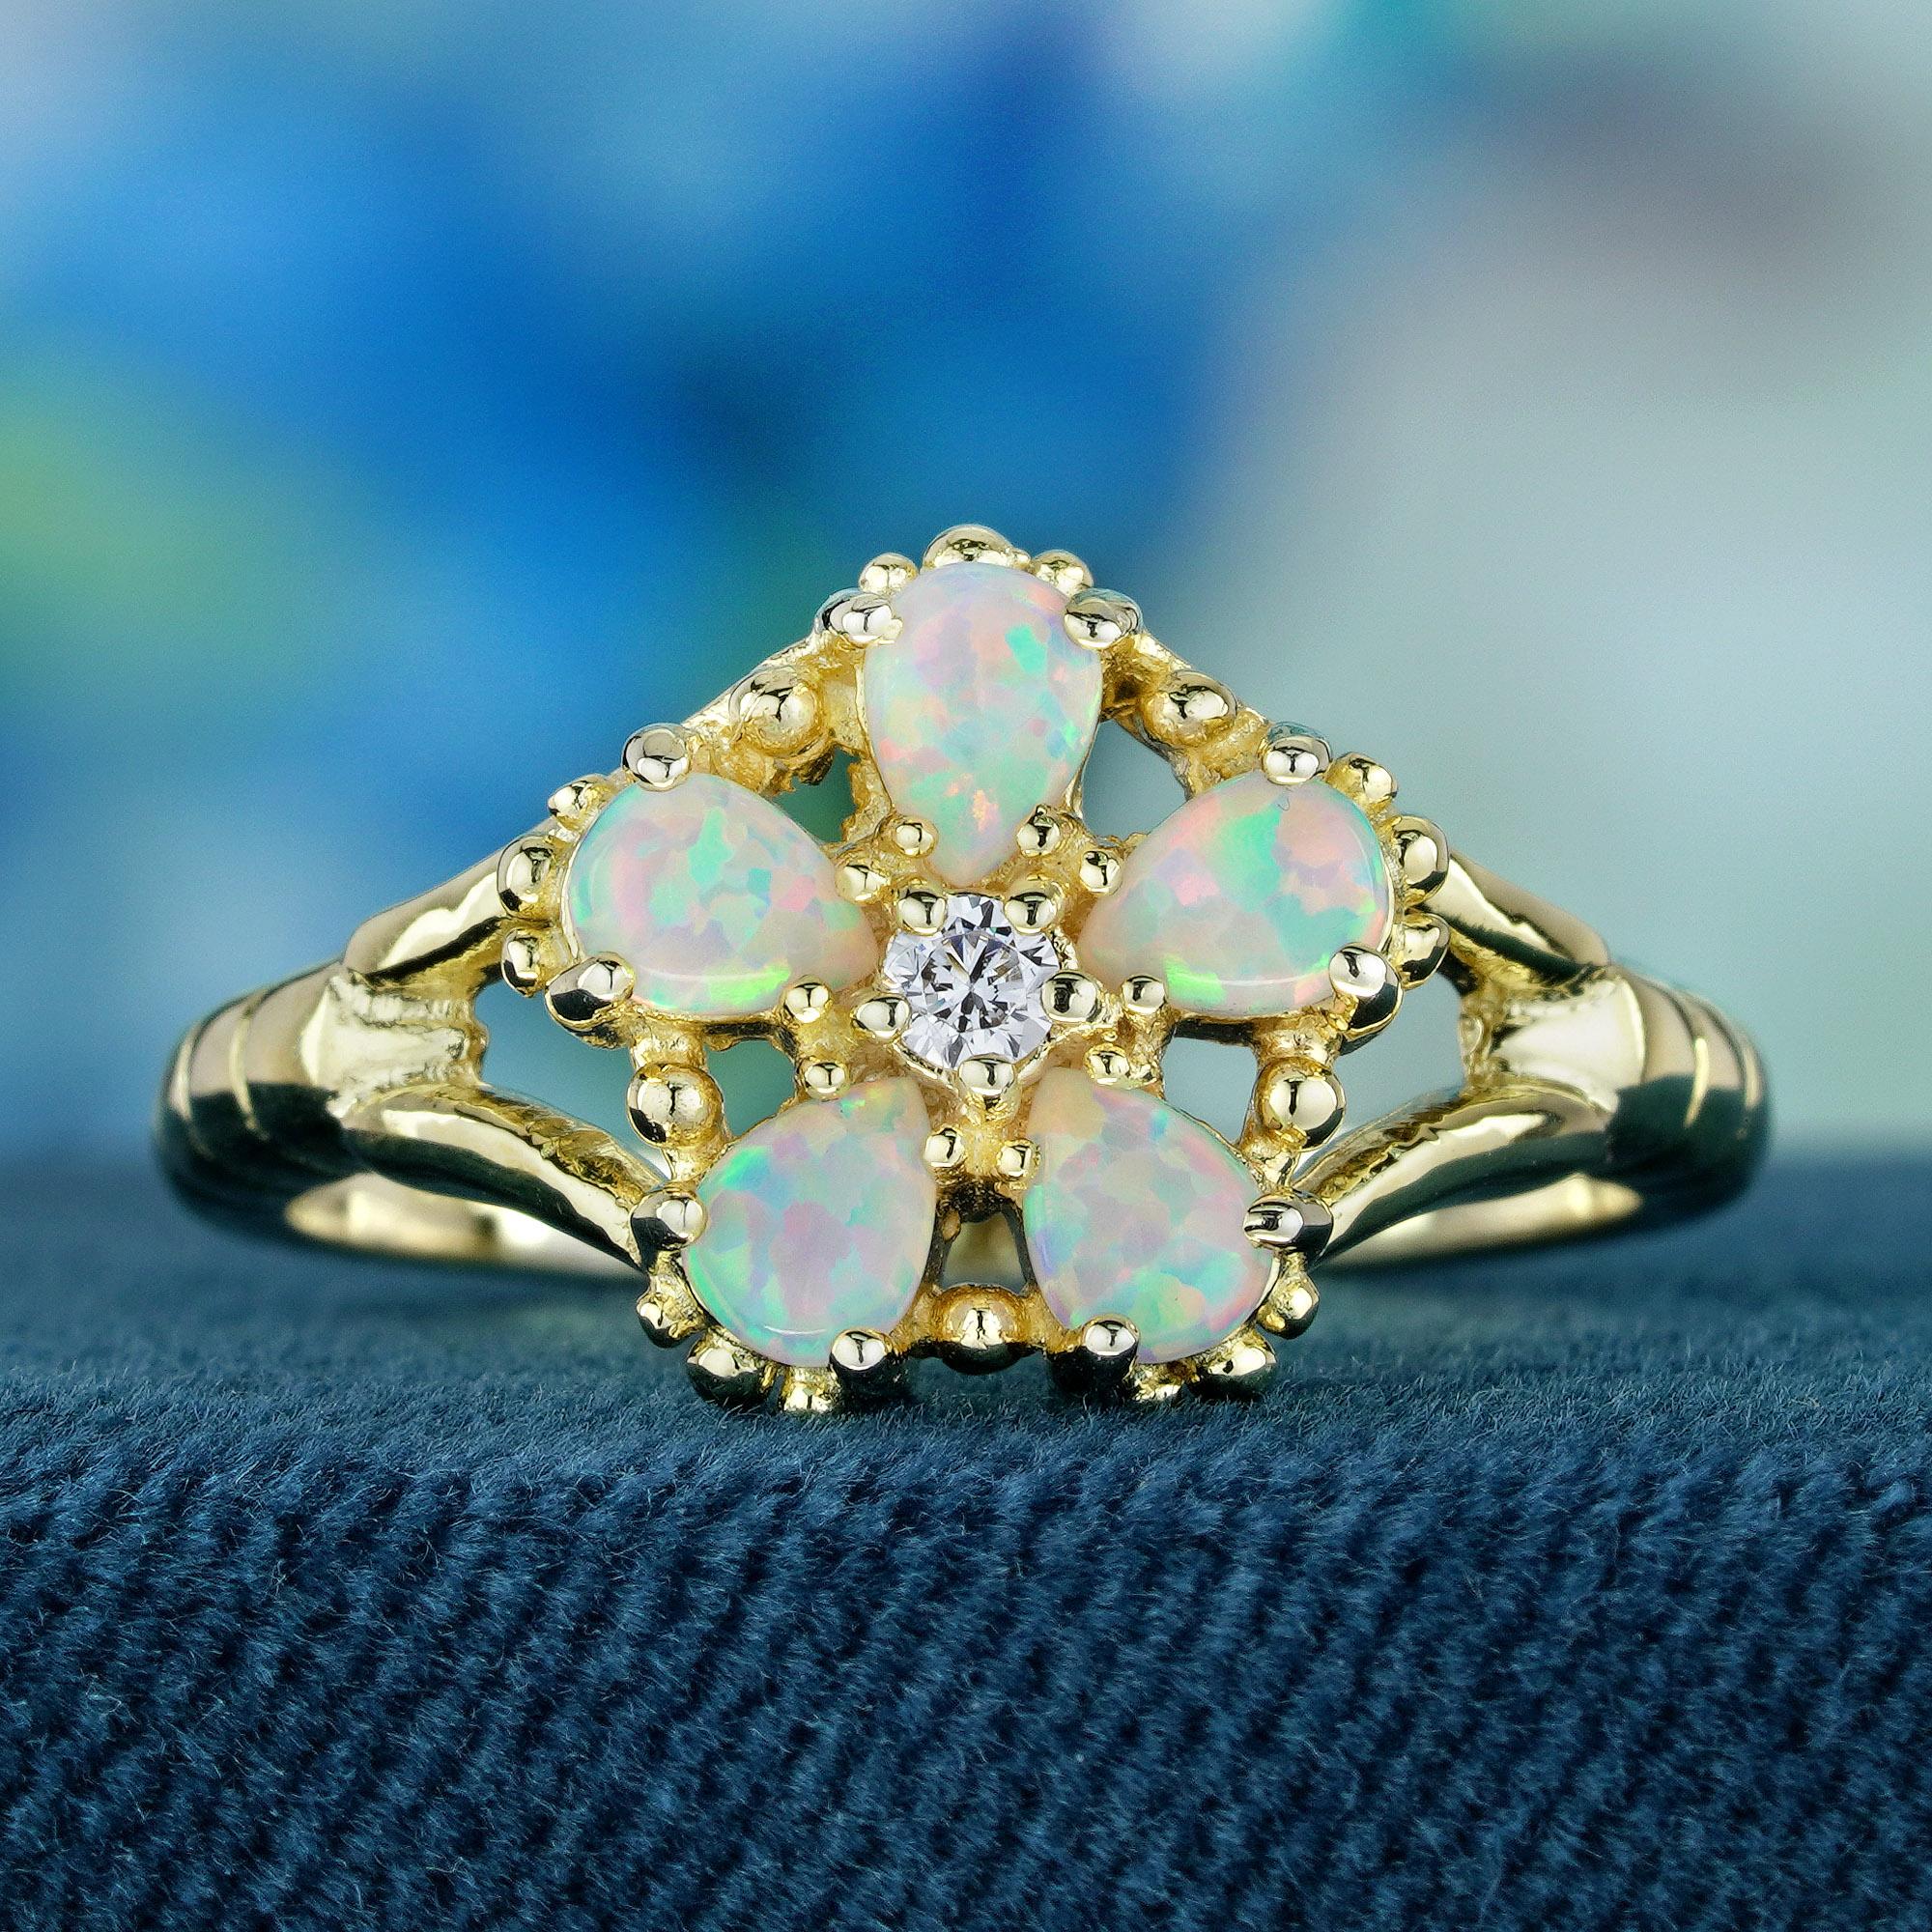 Indulge in timeless elegance with our Opal and Diamond Vintage Floral Ring in yellow gold. Meticulously crafted with delicate filigree, this stunning piece showcases five pear-shaped opals gracefully set as petals, accentuated by a dazzling diamond